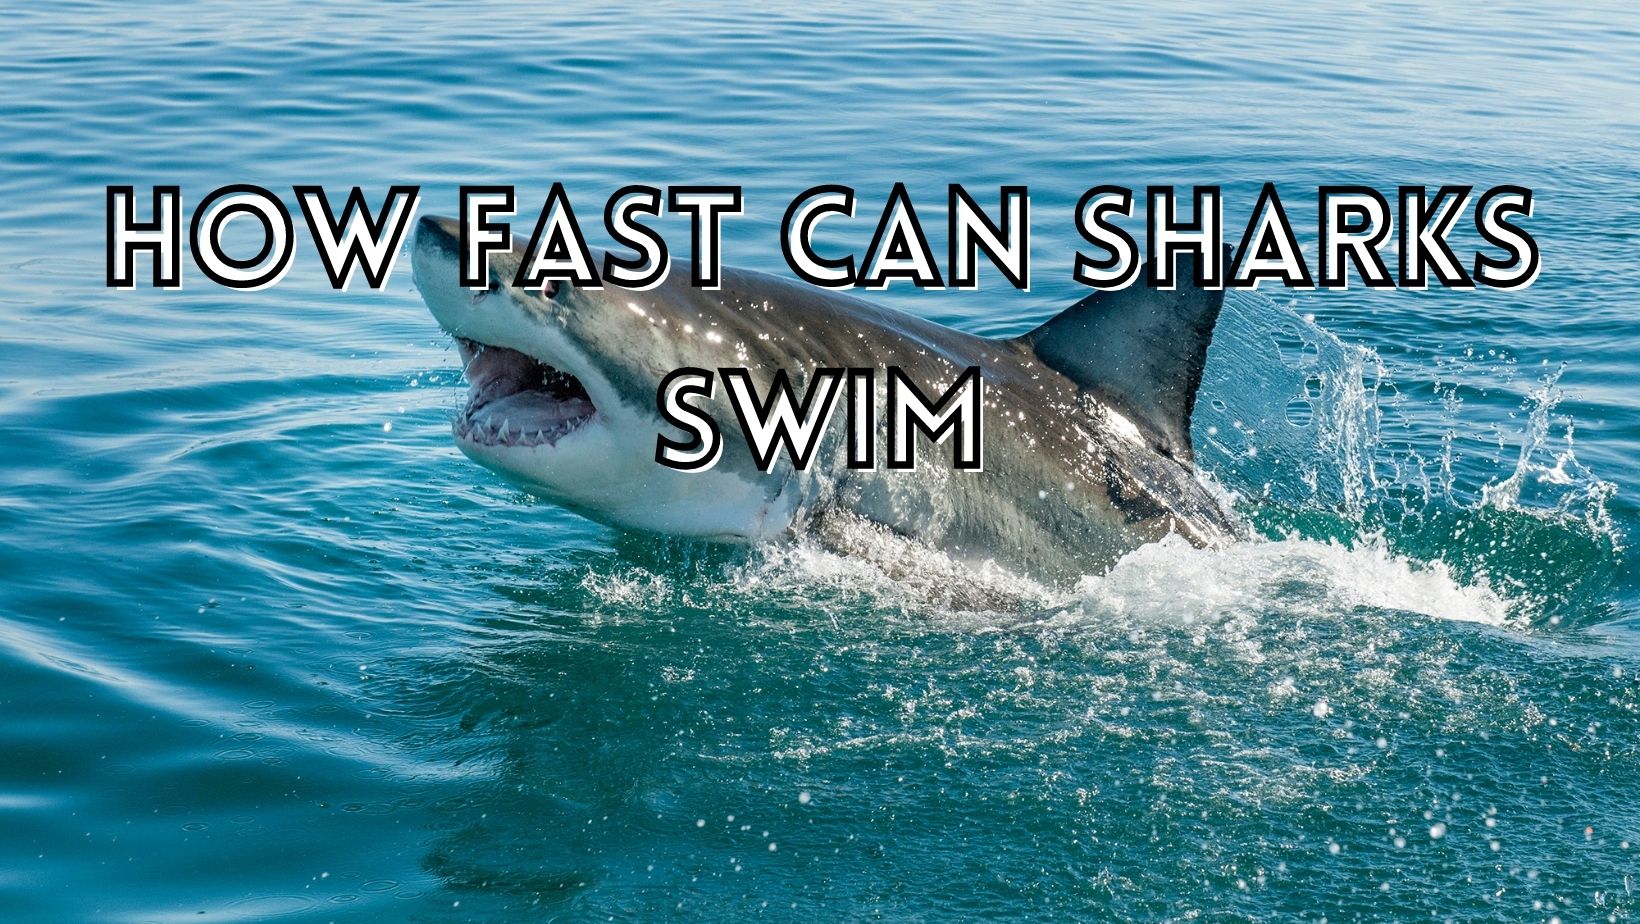 How fast can sharks swim